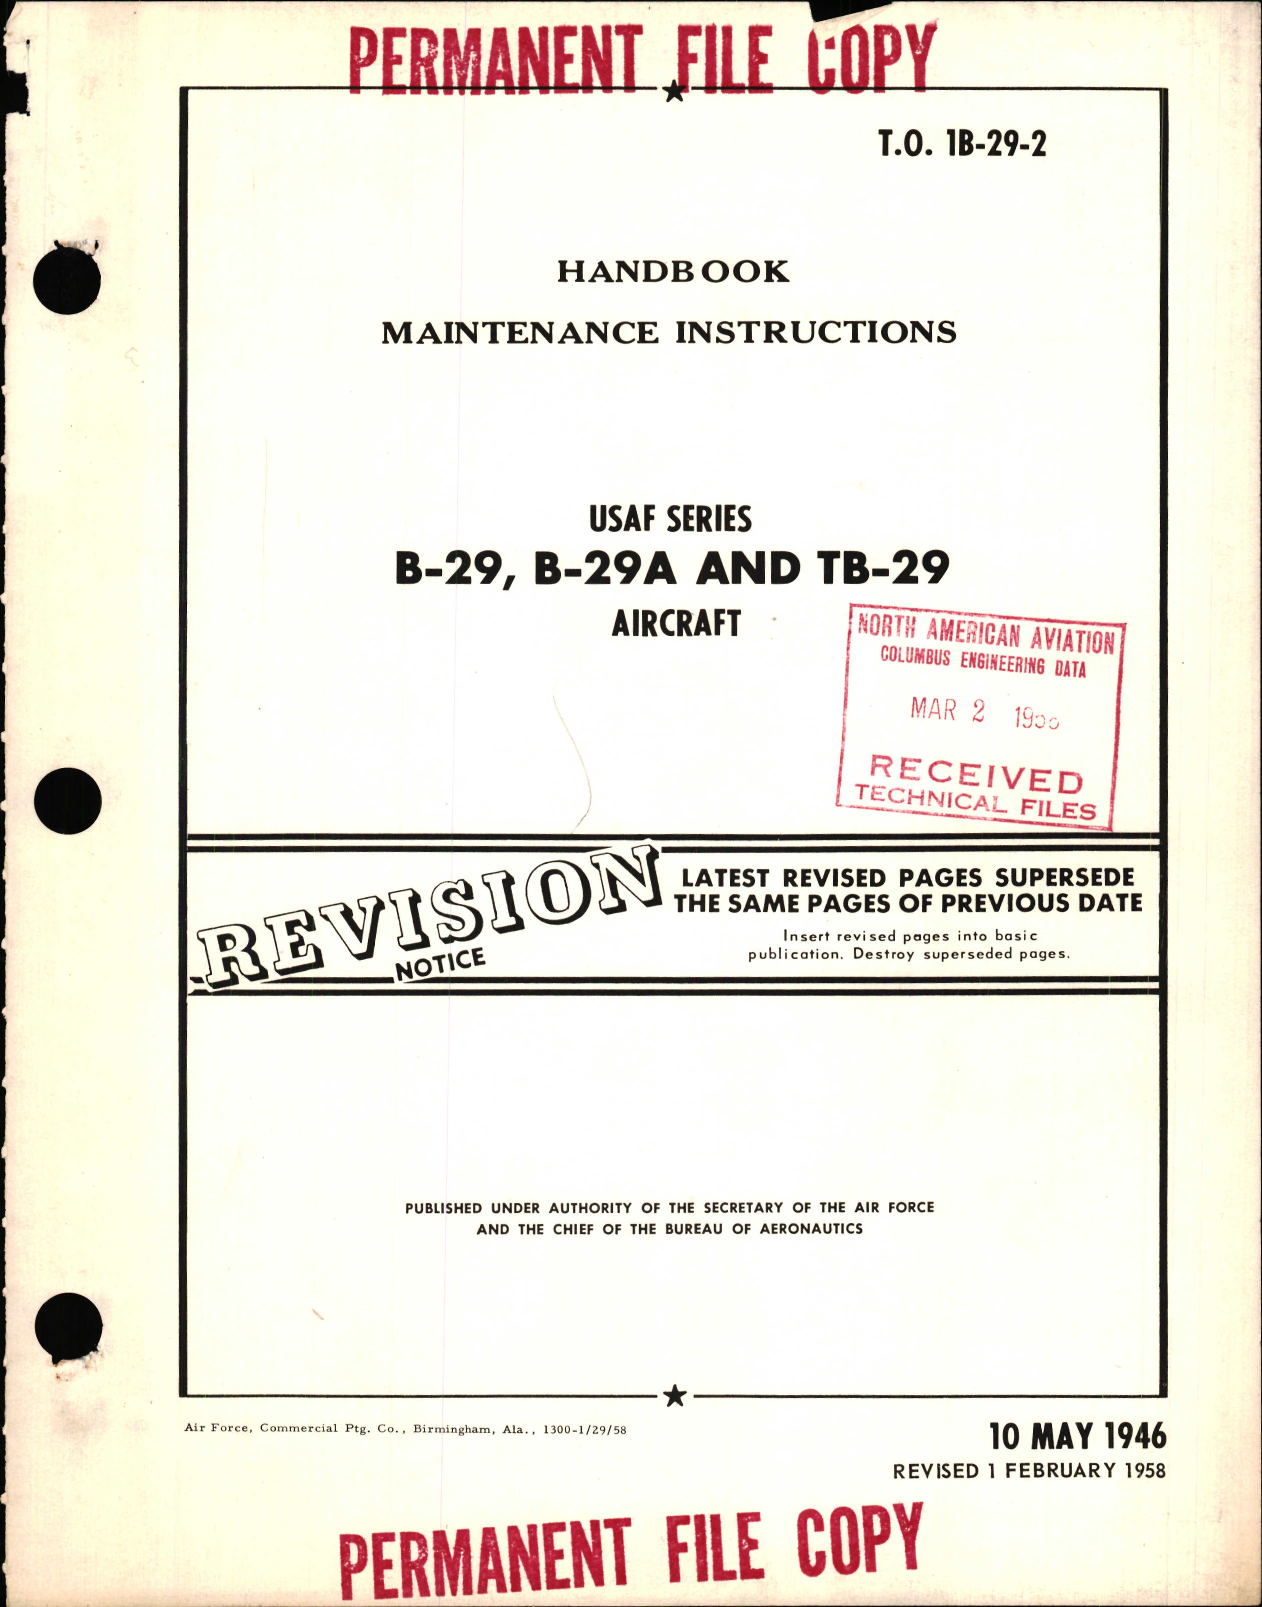 Sample page 1 from AirCorps Library document: Maintenance Instructions for B-29, B-29A, and TB-29 